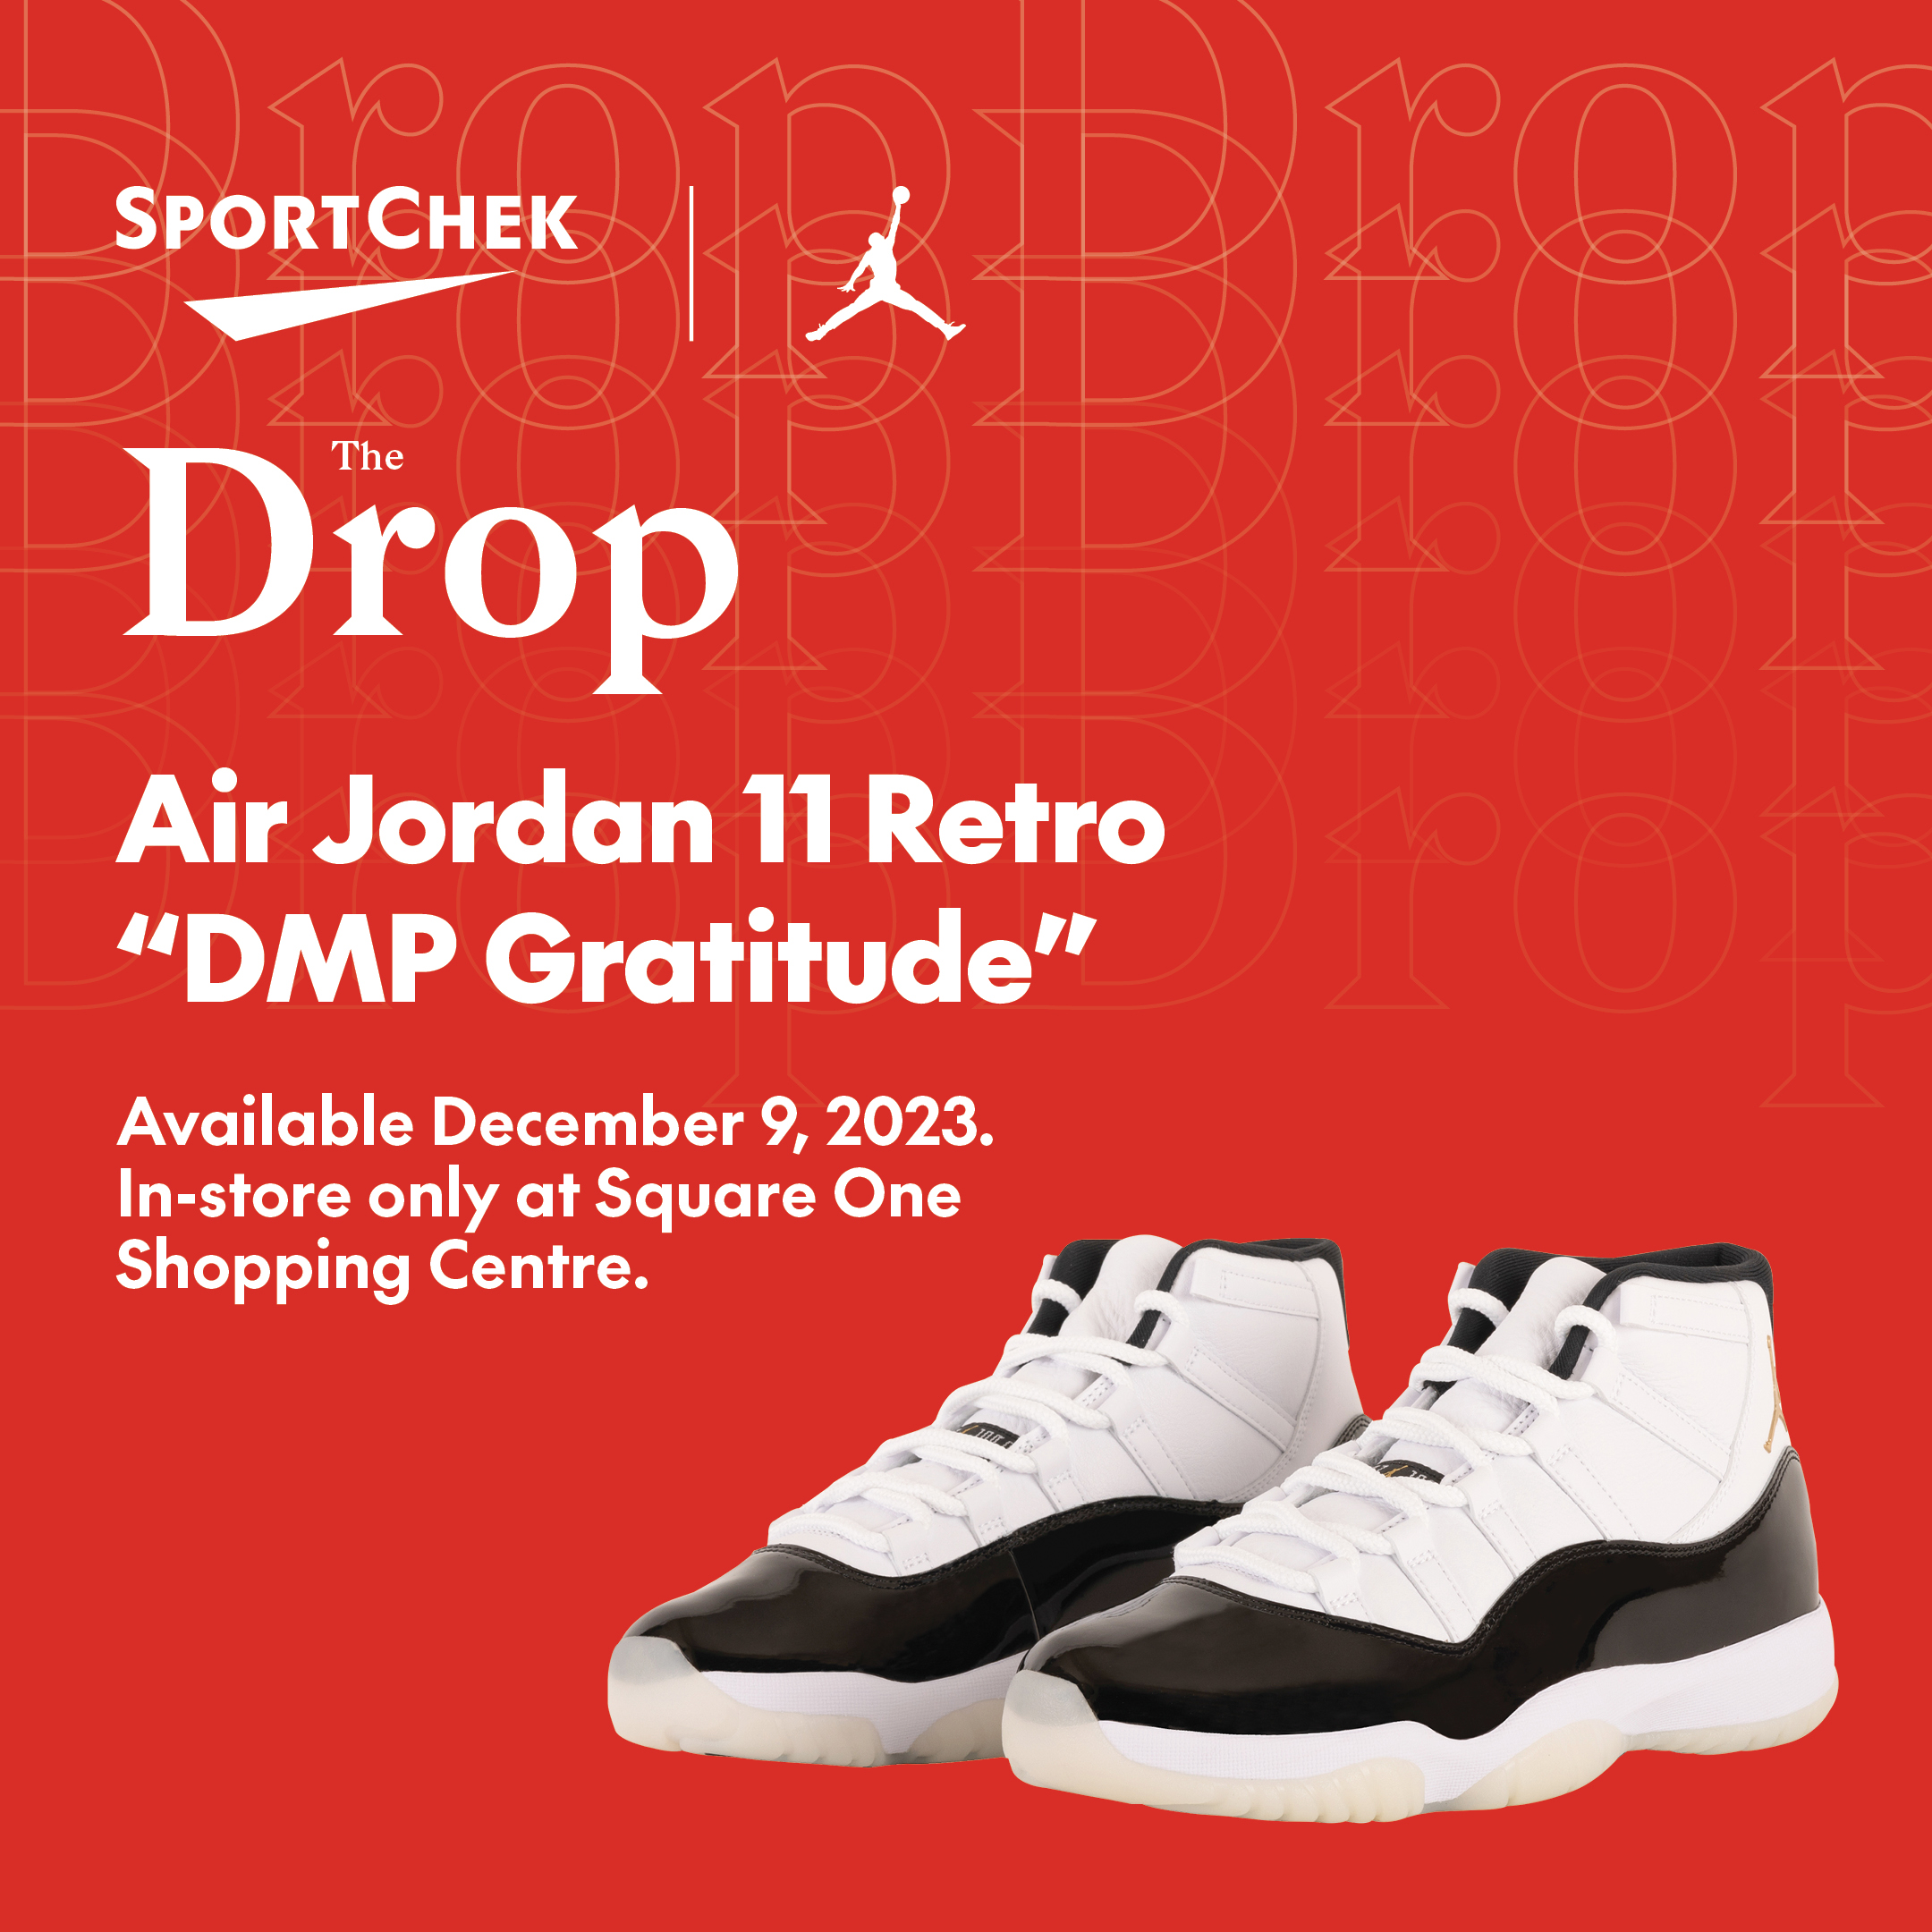 Promotional poster for the release of the Air Jordan 11 at Sport Chek